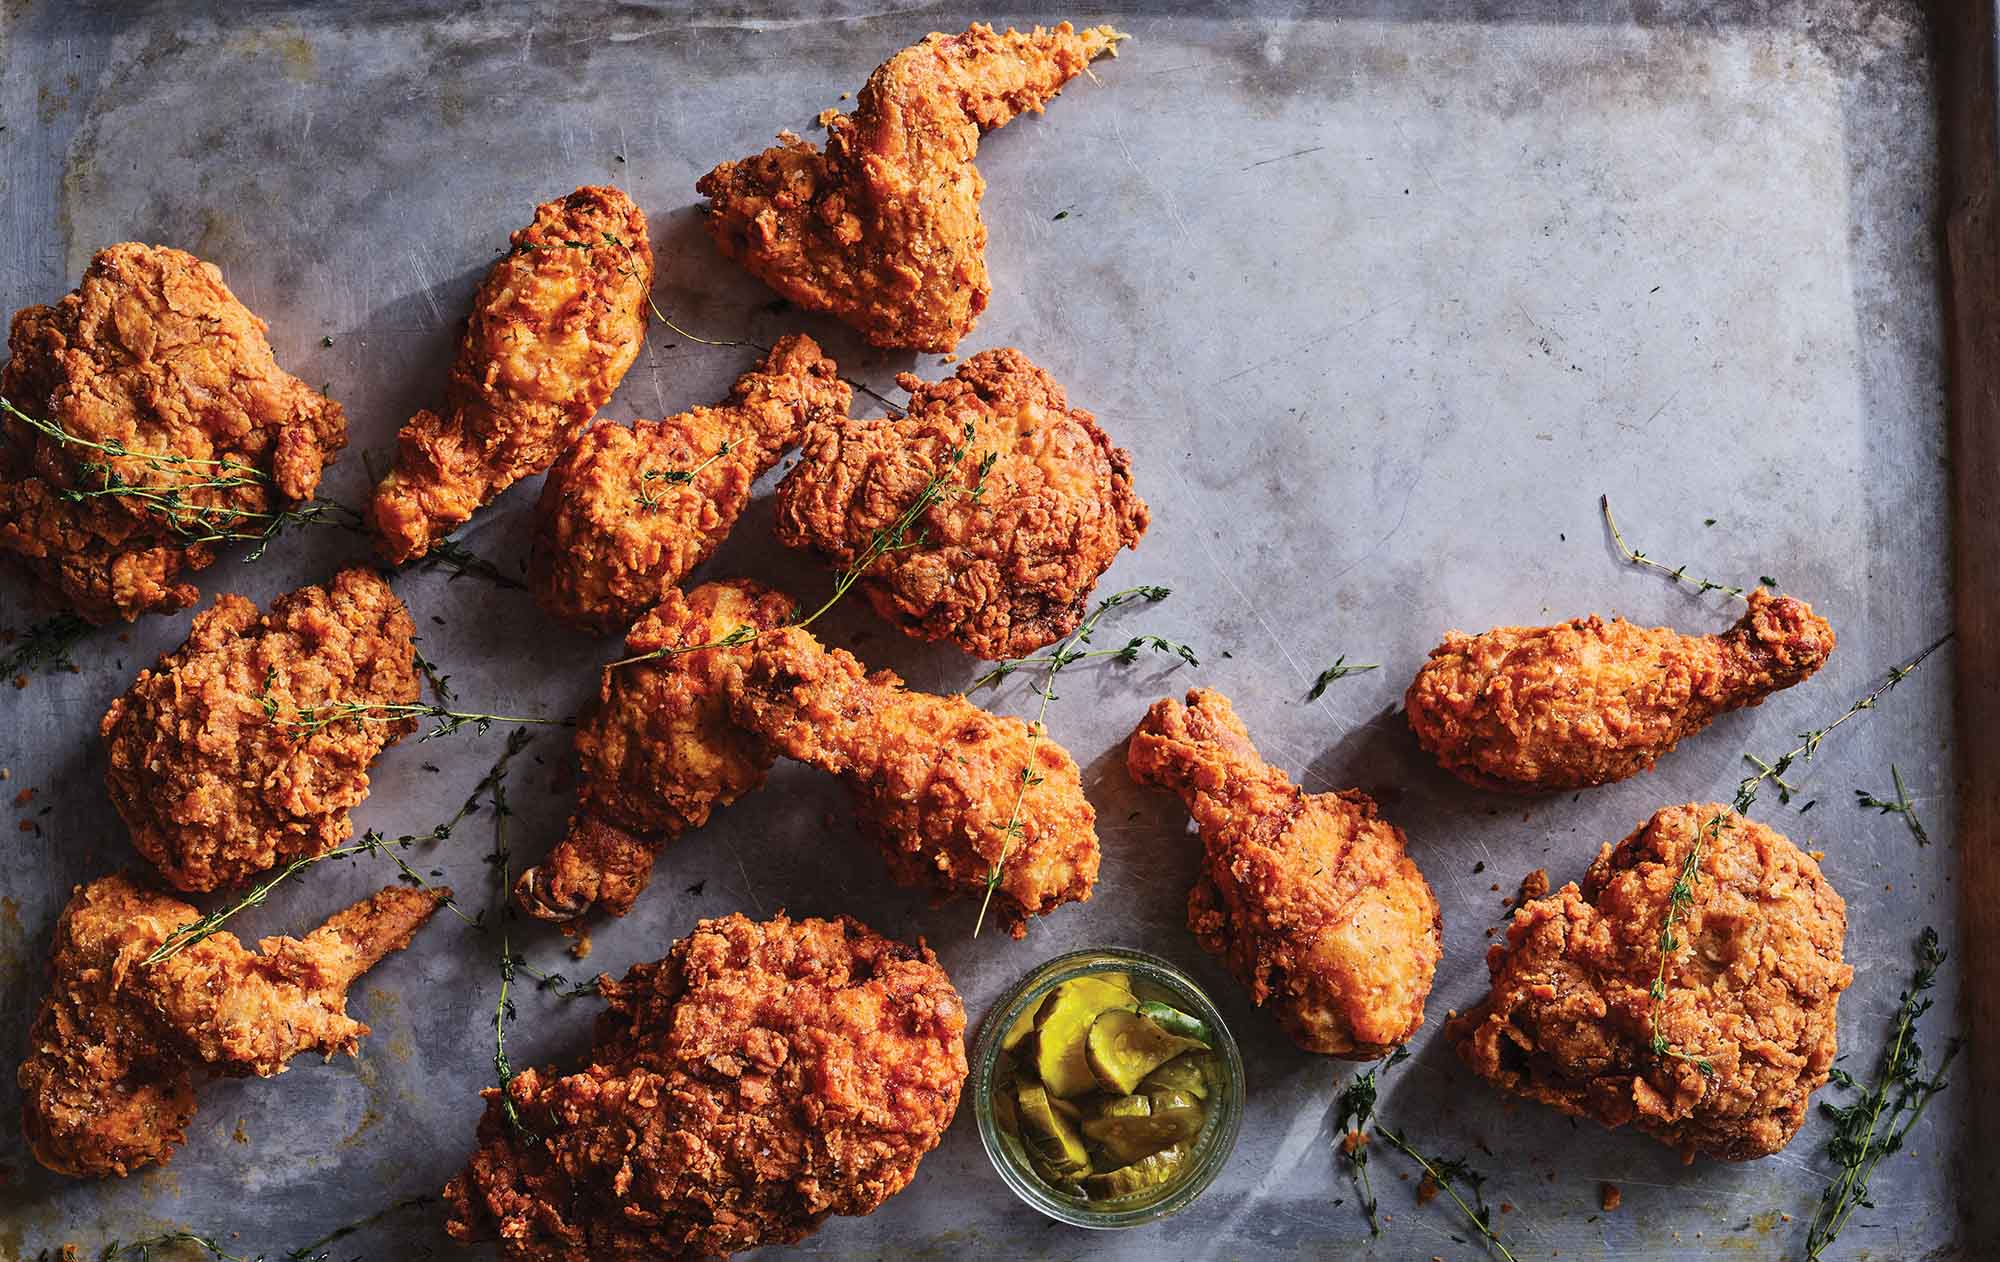 Southern Chef Shares His Secrets for the Best Fried Chicken